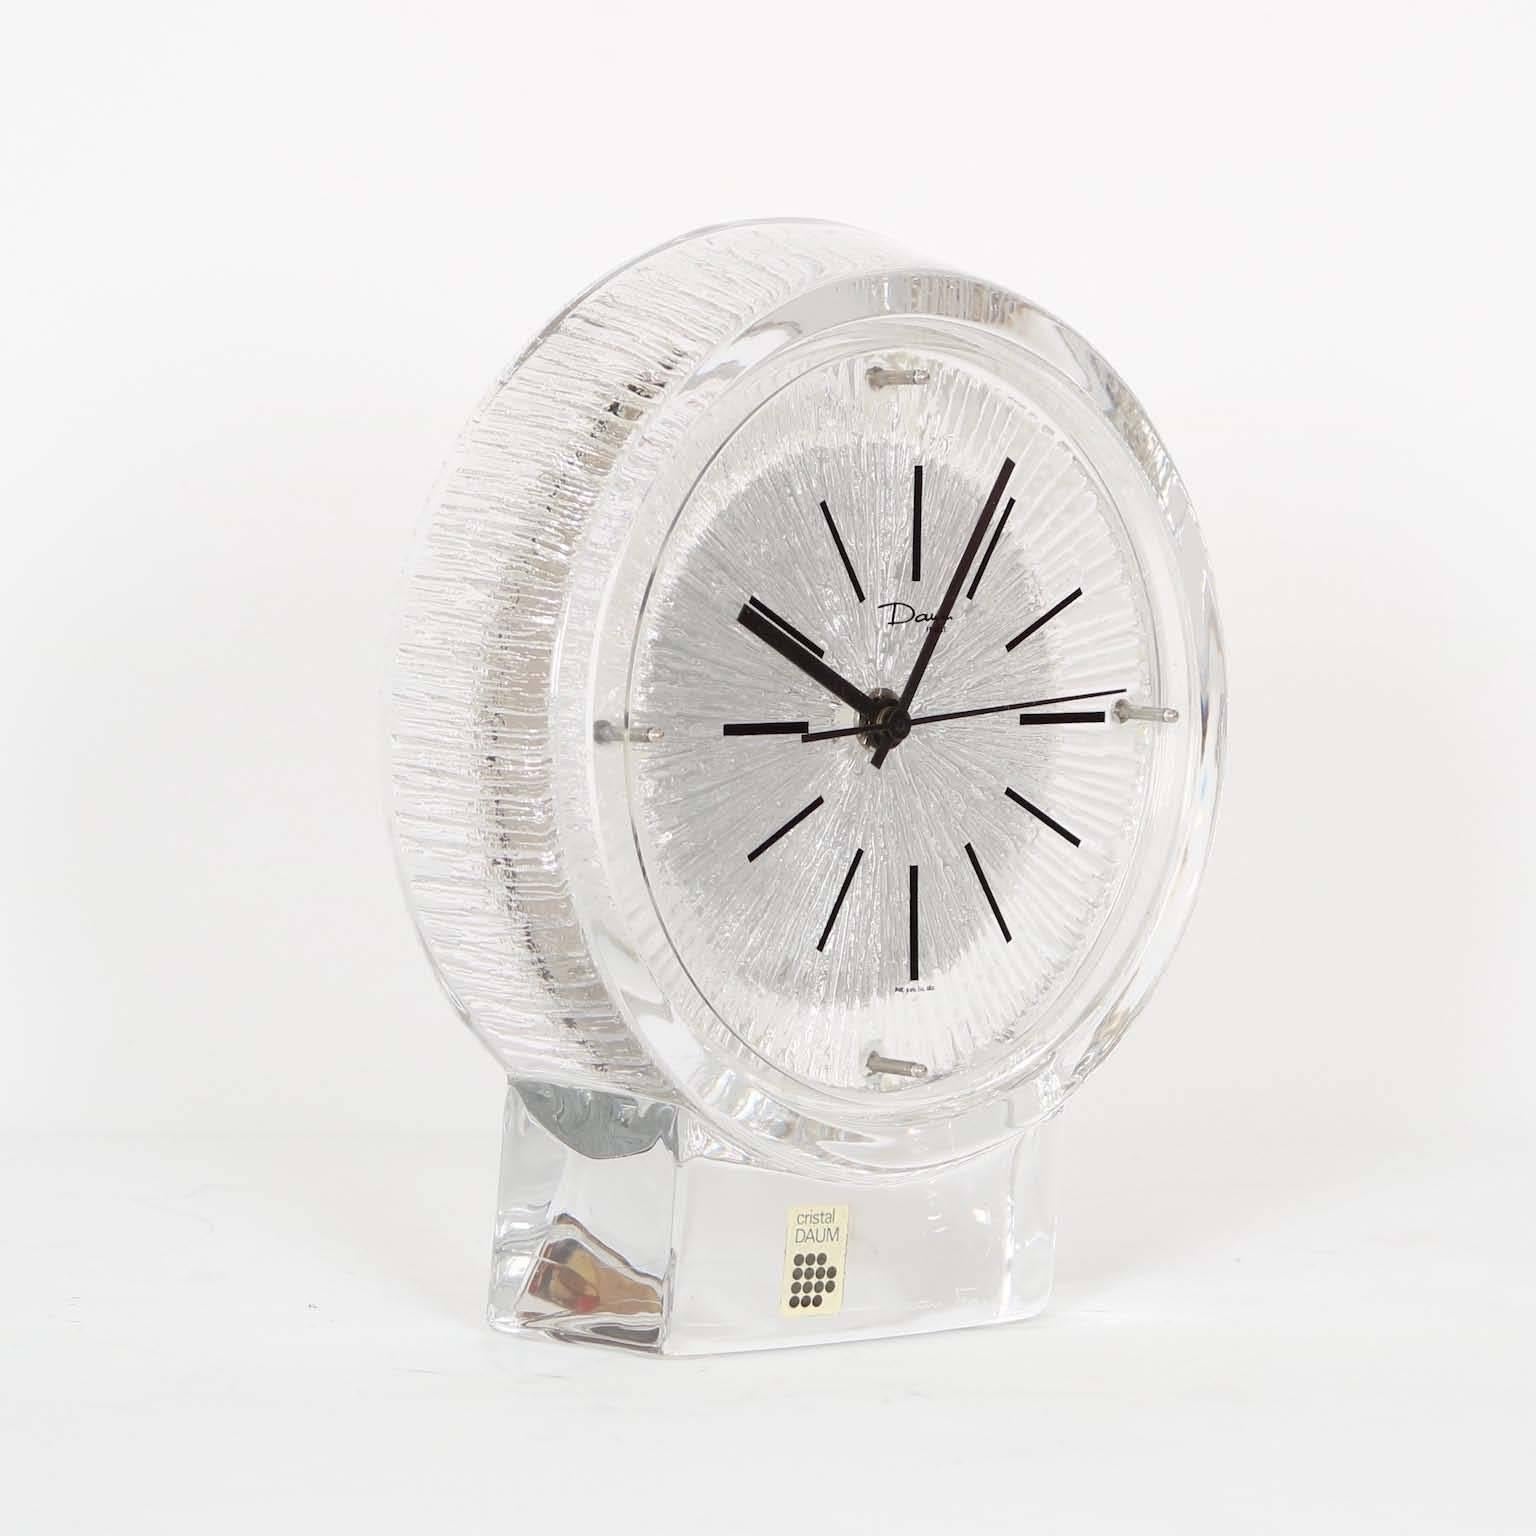 A Thor model desk clock by Daum, produced in France, circa 1970s, round glass face set against textured crystal on clear base. Markings include original label [Crystal Daum] to the front along the base. Excellent vintage condition, consistent with